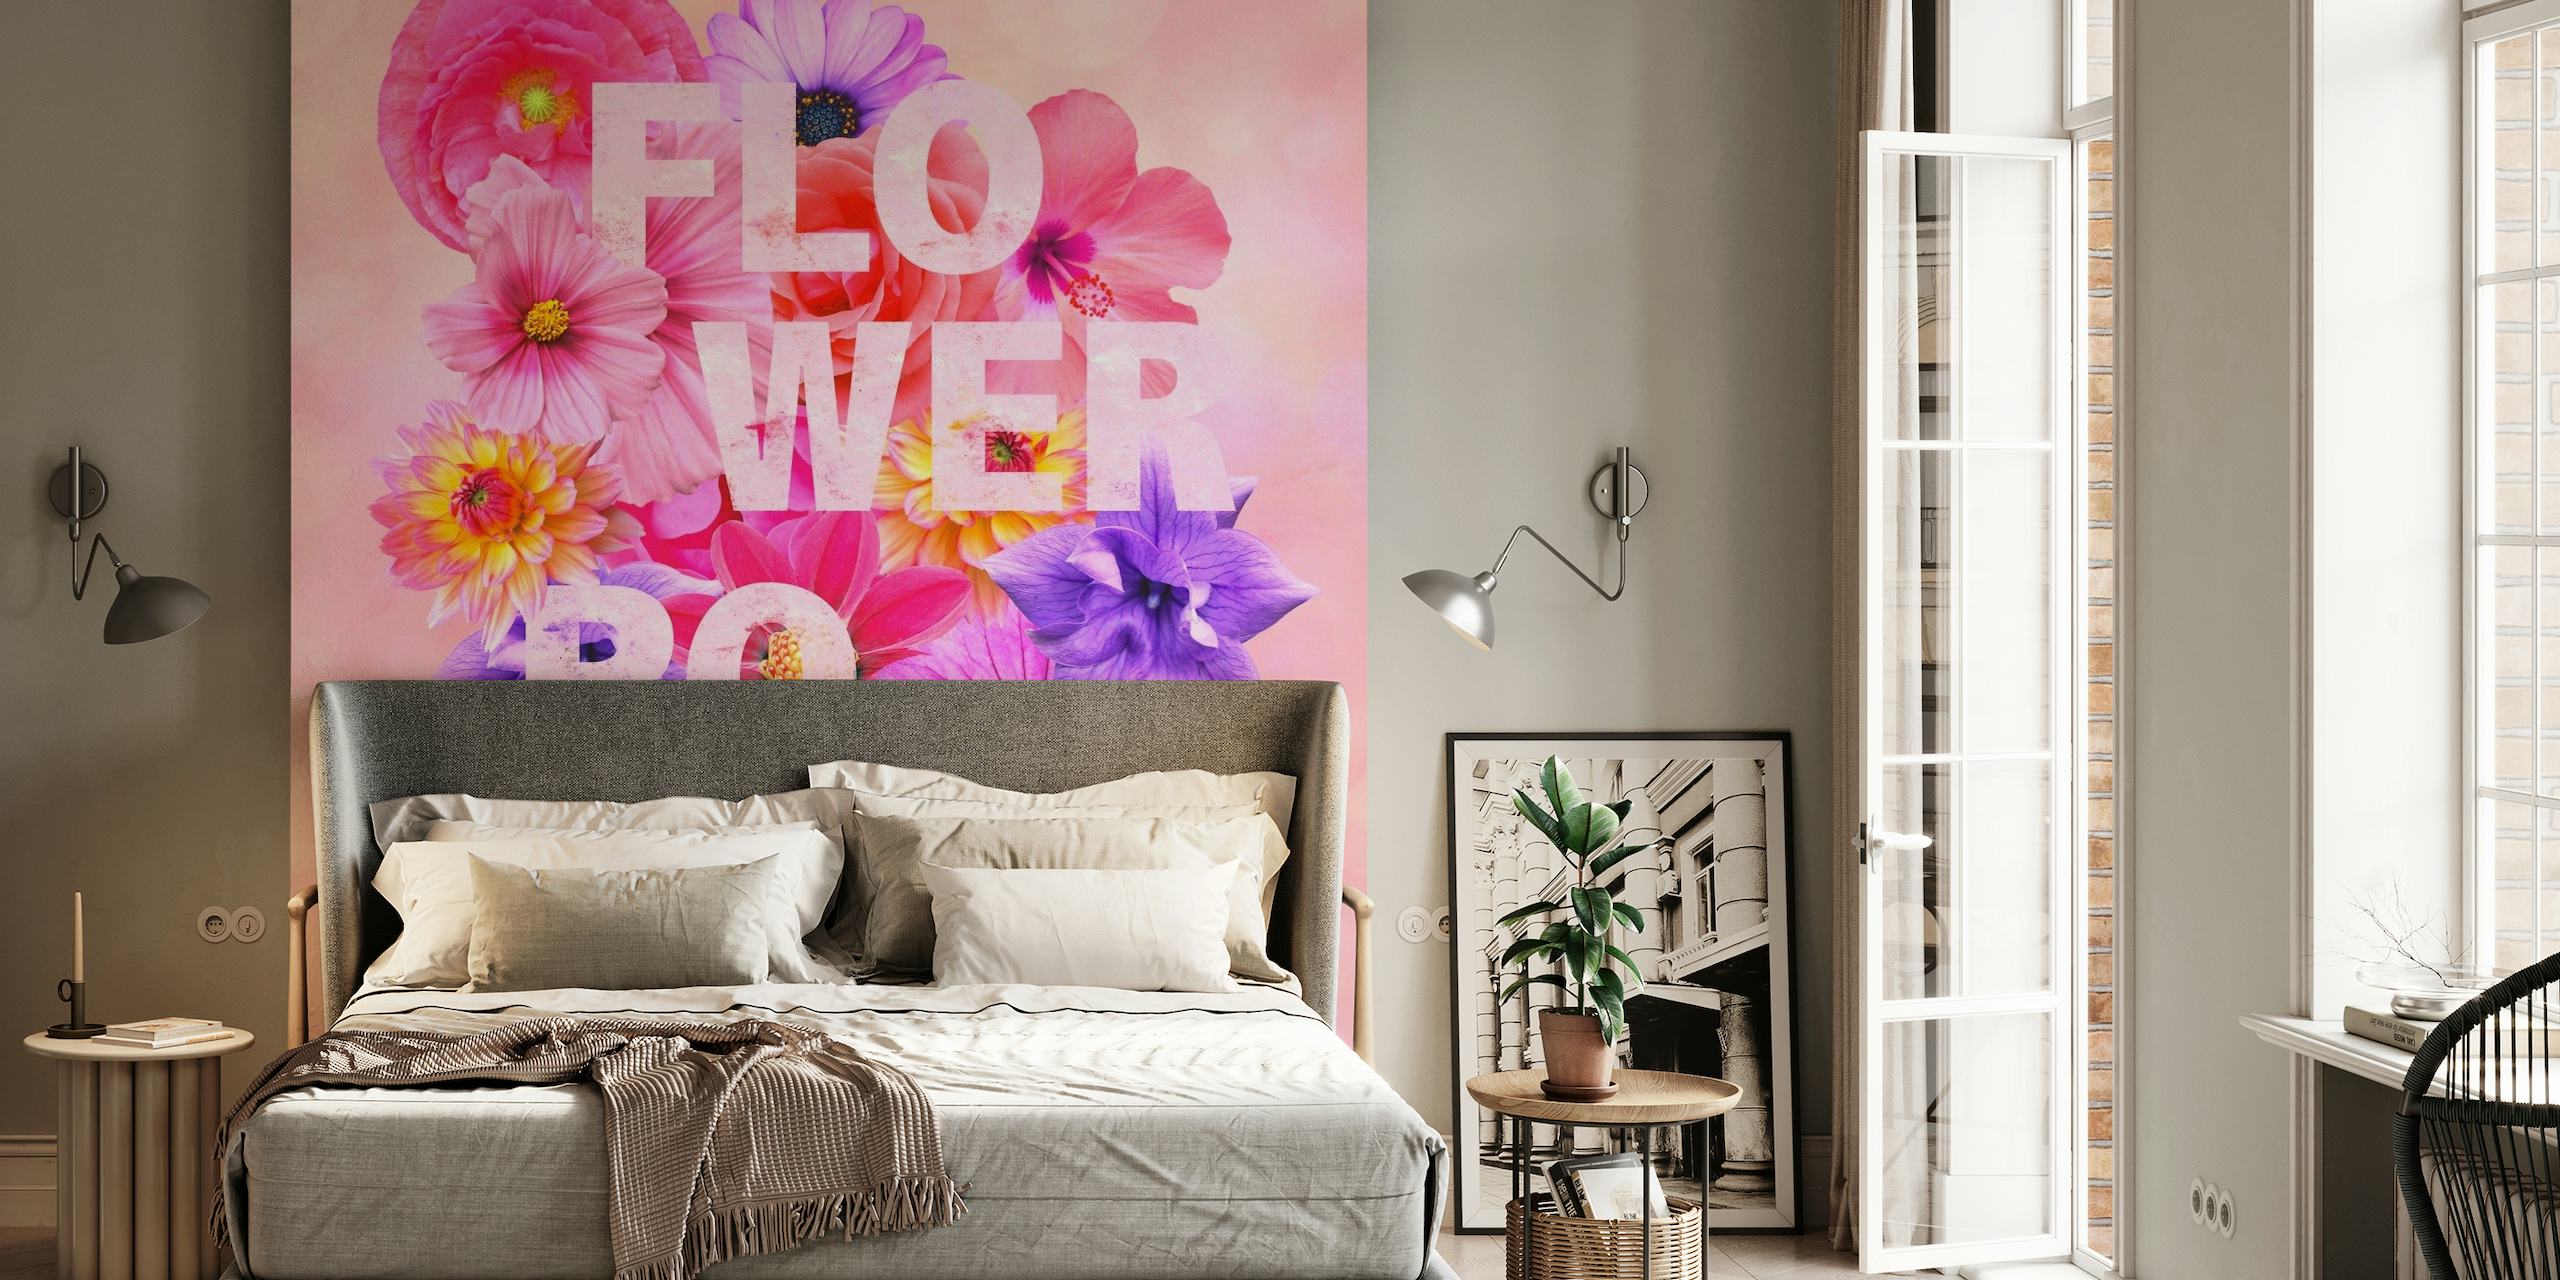 Colorful floral wall mural with 'FLOWER POWER' text, exuding a vibrant, springtime atmosphere